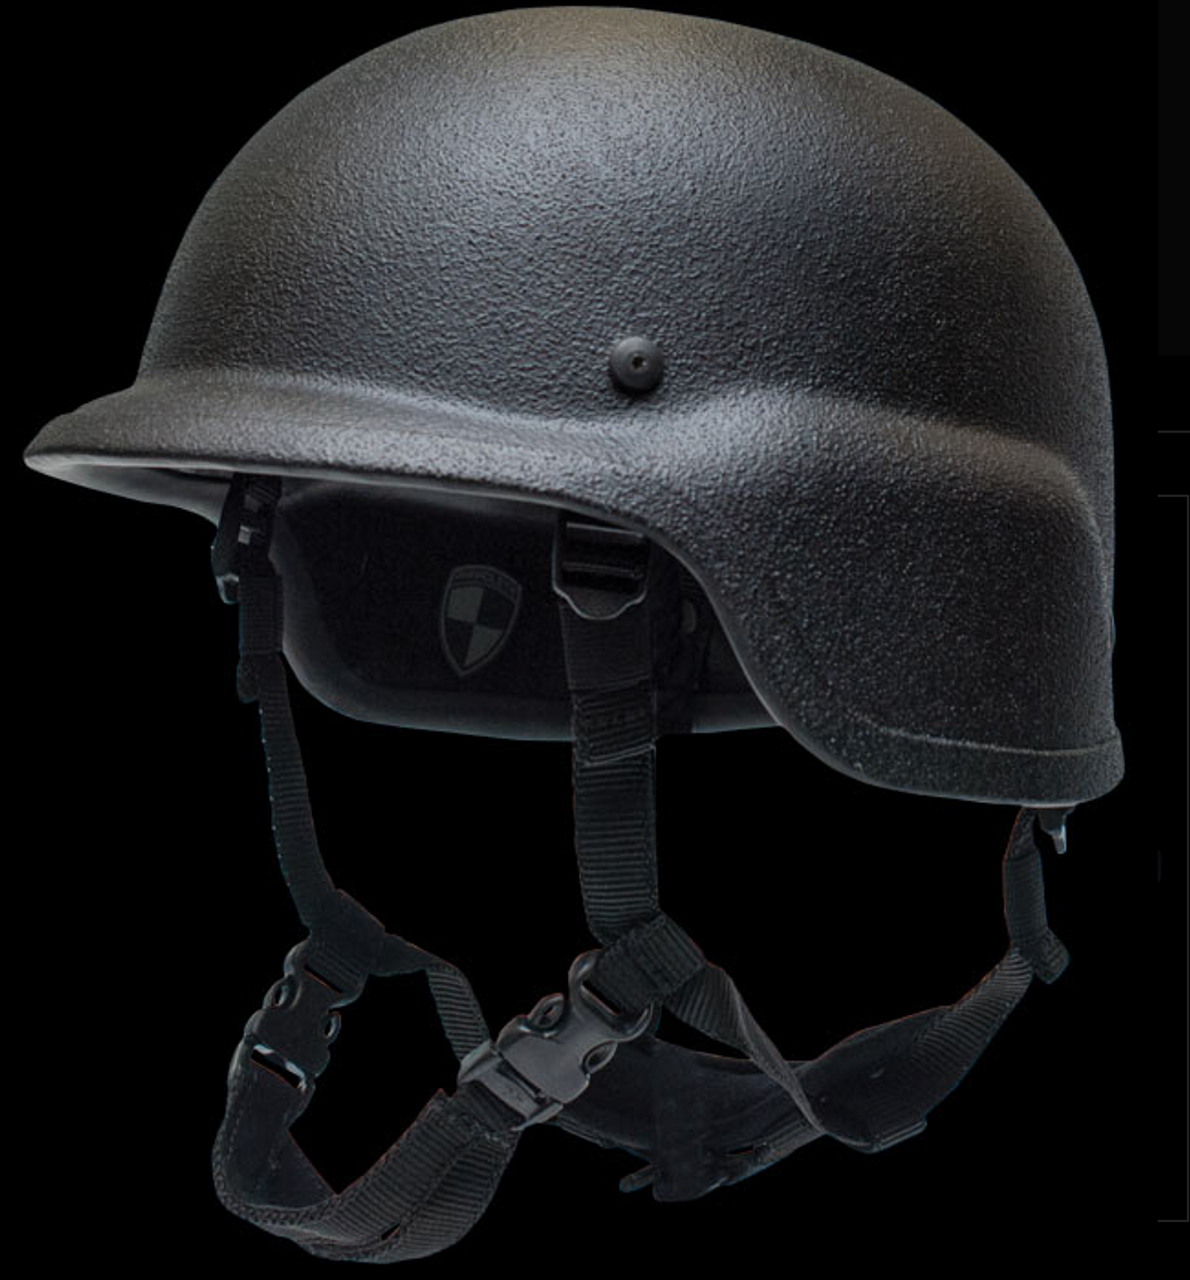 Point Blank PASGT Helmet for Military and Police,  Meets NIJ Level IIIA ballistic threat protection standards and STANAG 2920 & MIL STD 662F Fragmentation Protection